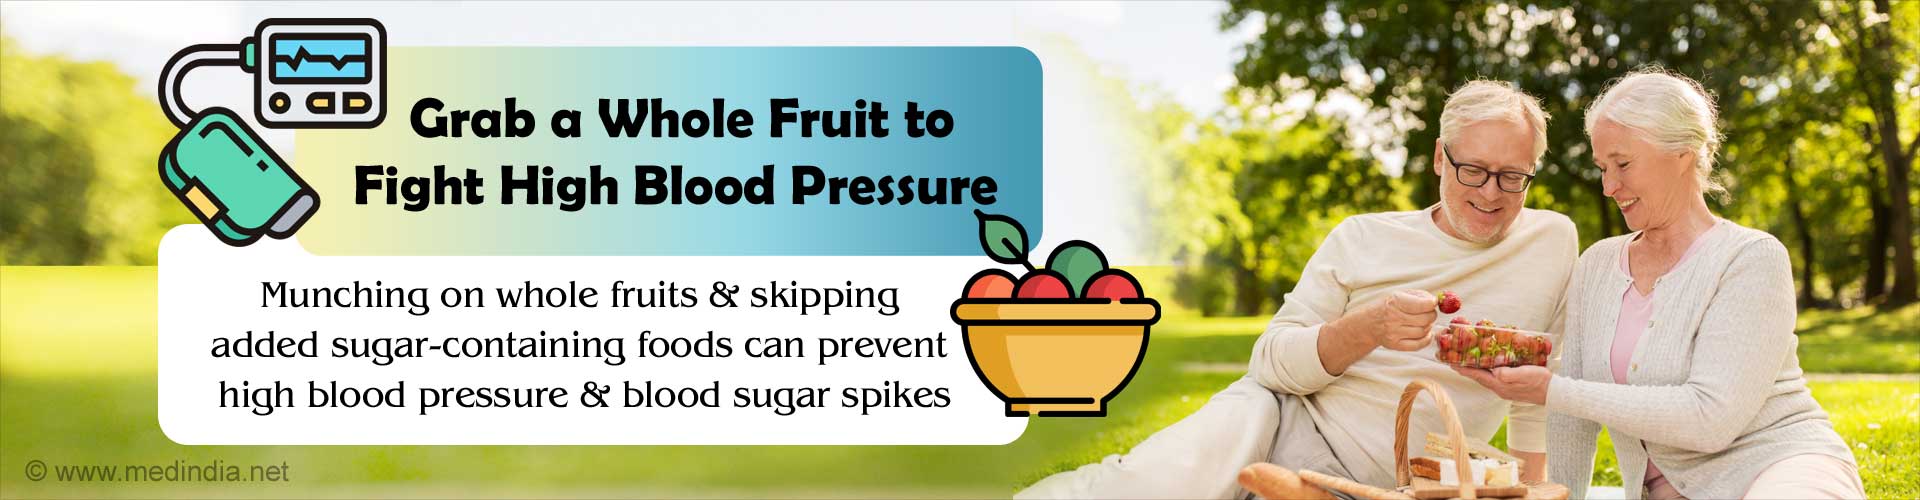 Grab a whole fruit to fight high blood pressure. Munching on whole fruits and skipping added sugar-containing foods can prevent high blood pressure and blood sugar spikes.
